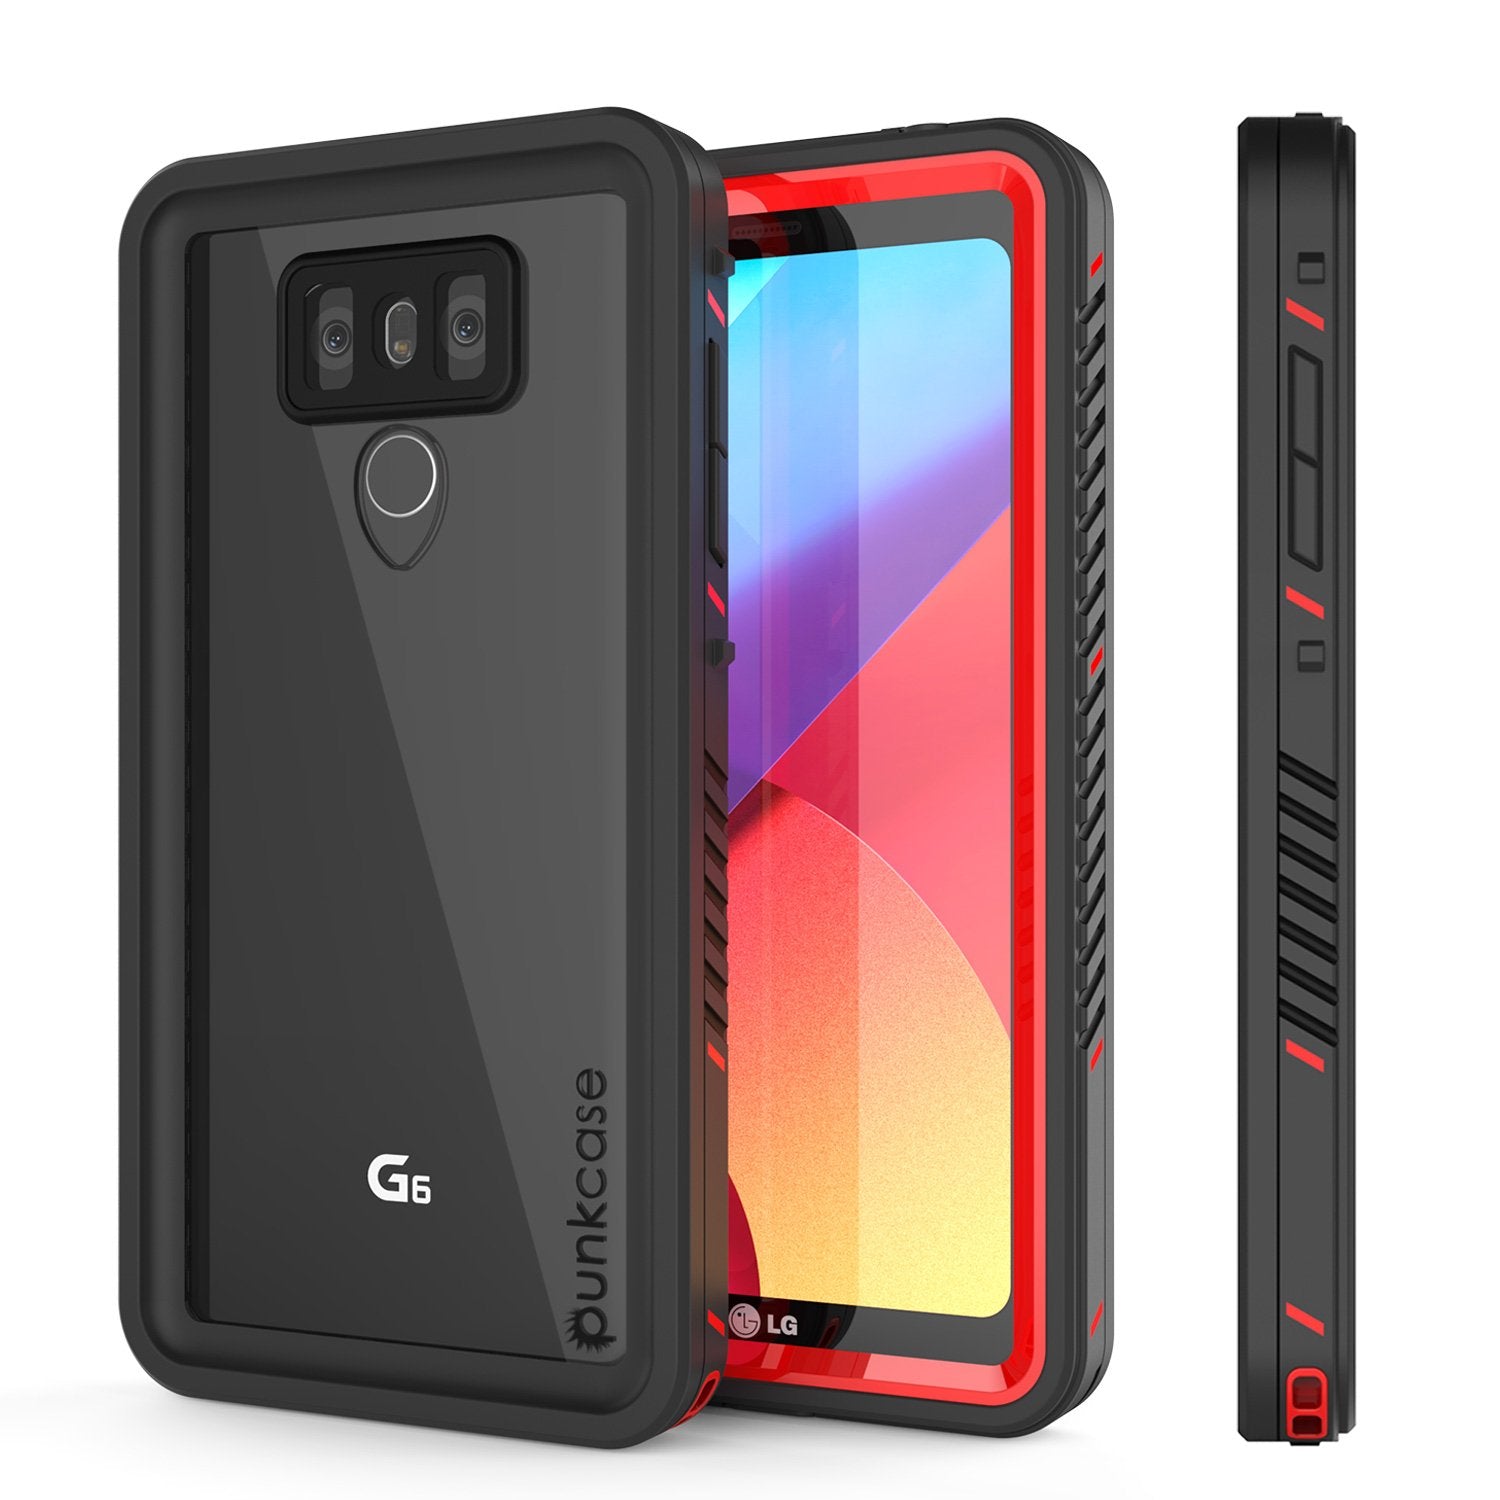 LG G6 Waterproof Case, Punkcase [Extreme Series] [Slim Fit] [IP68 Certified] [Shockproof] [Snowproof] [Dirproof] Armor Cover W/ Built In Screen Protector for LG G6 [RED]